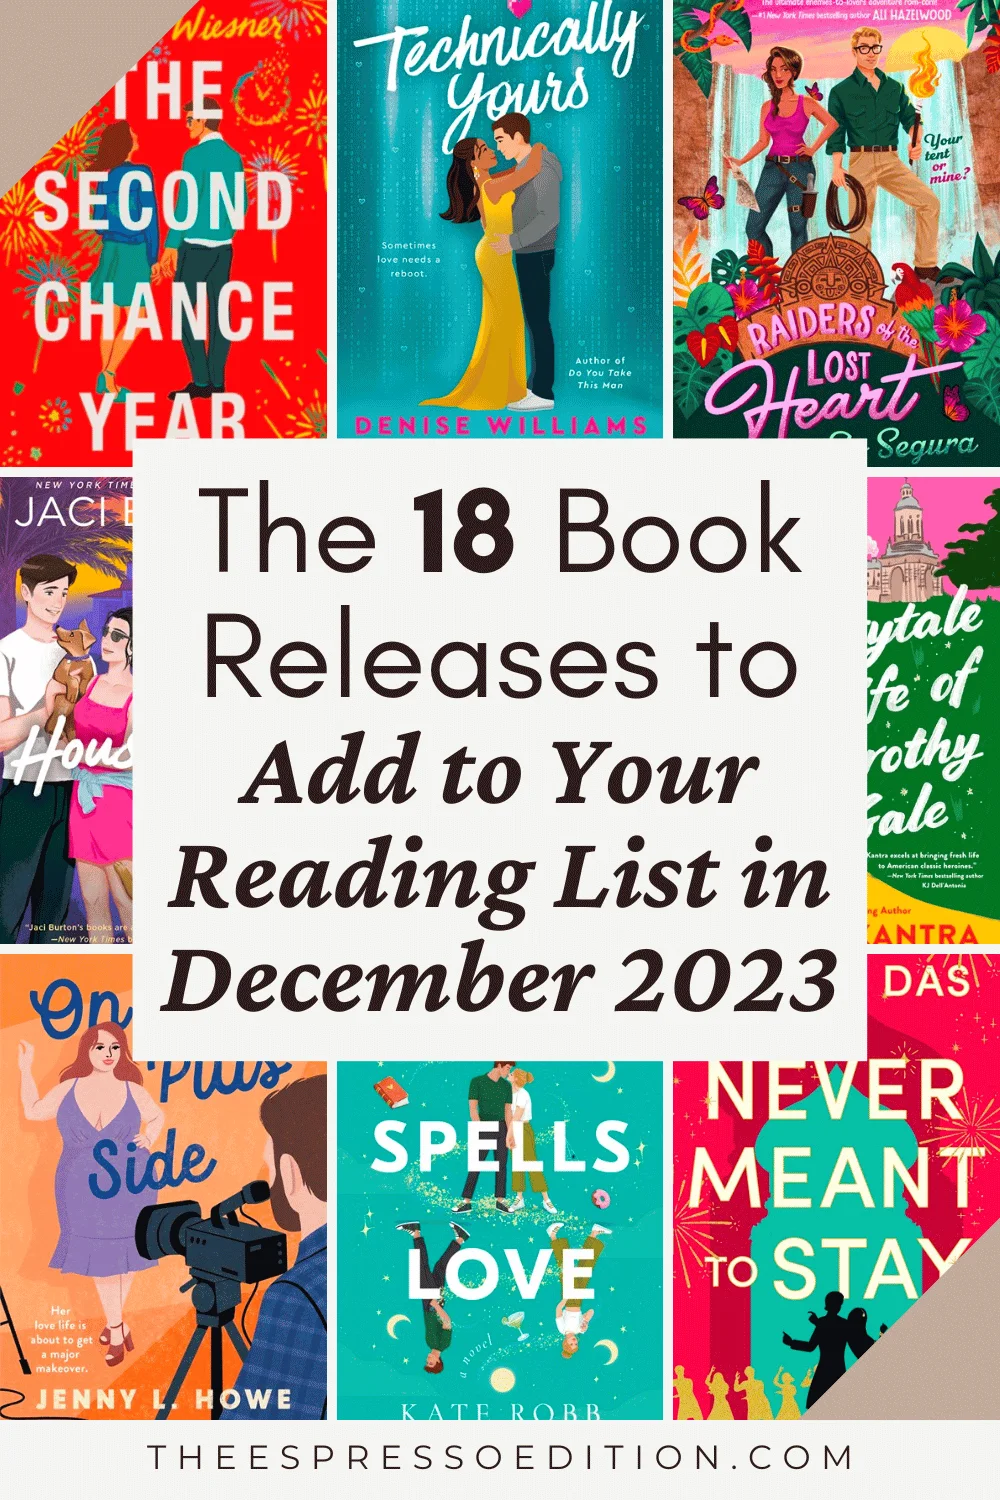 The 18 Book Releases to Add to Your Reading List in December 2023 by The Espresso Edition cozy bookish blog